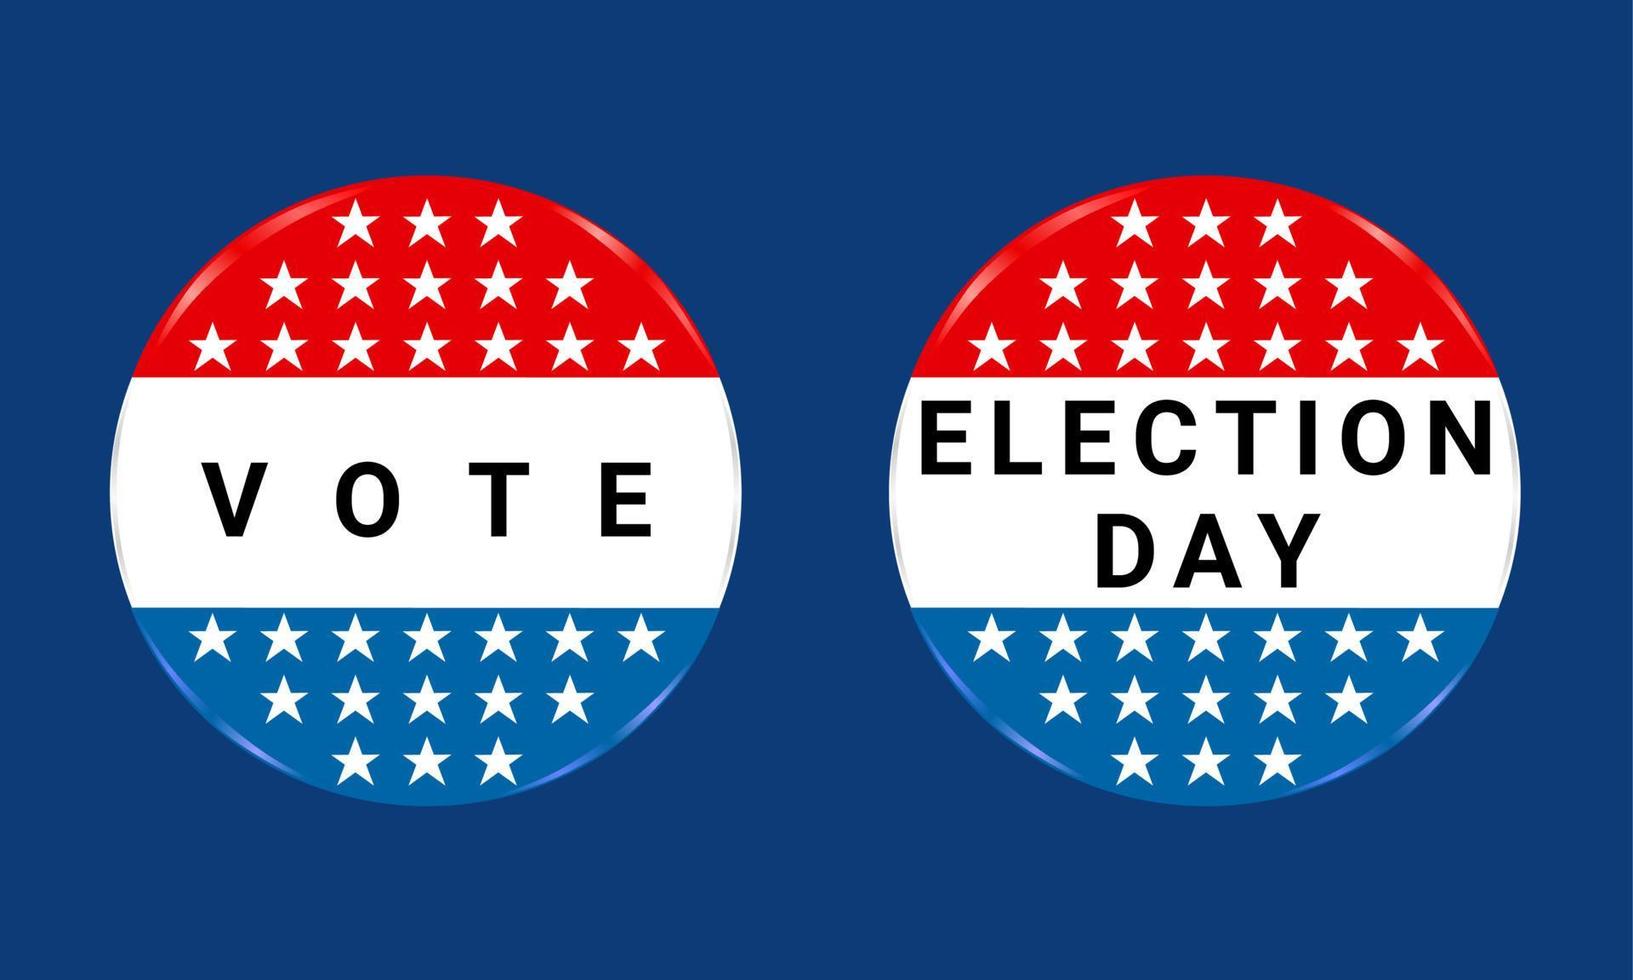 vote and election day icon or logo illustration, Election Day November 8, 2022, vector